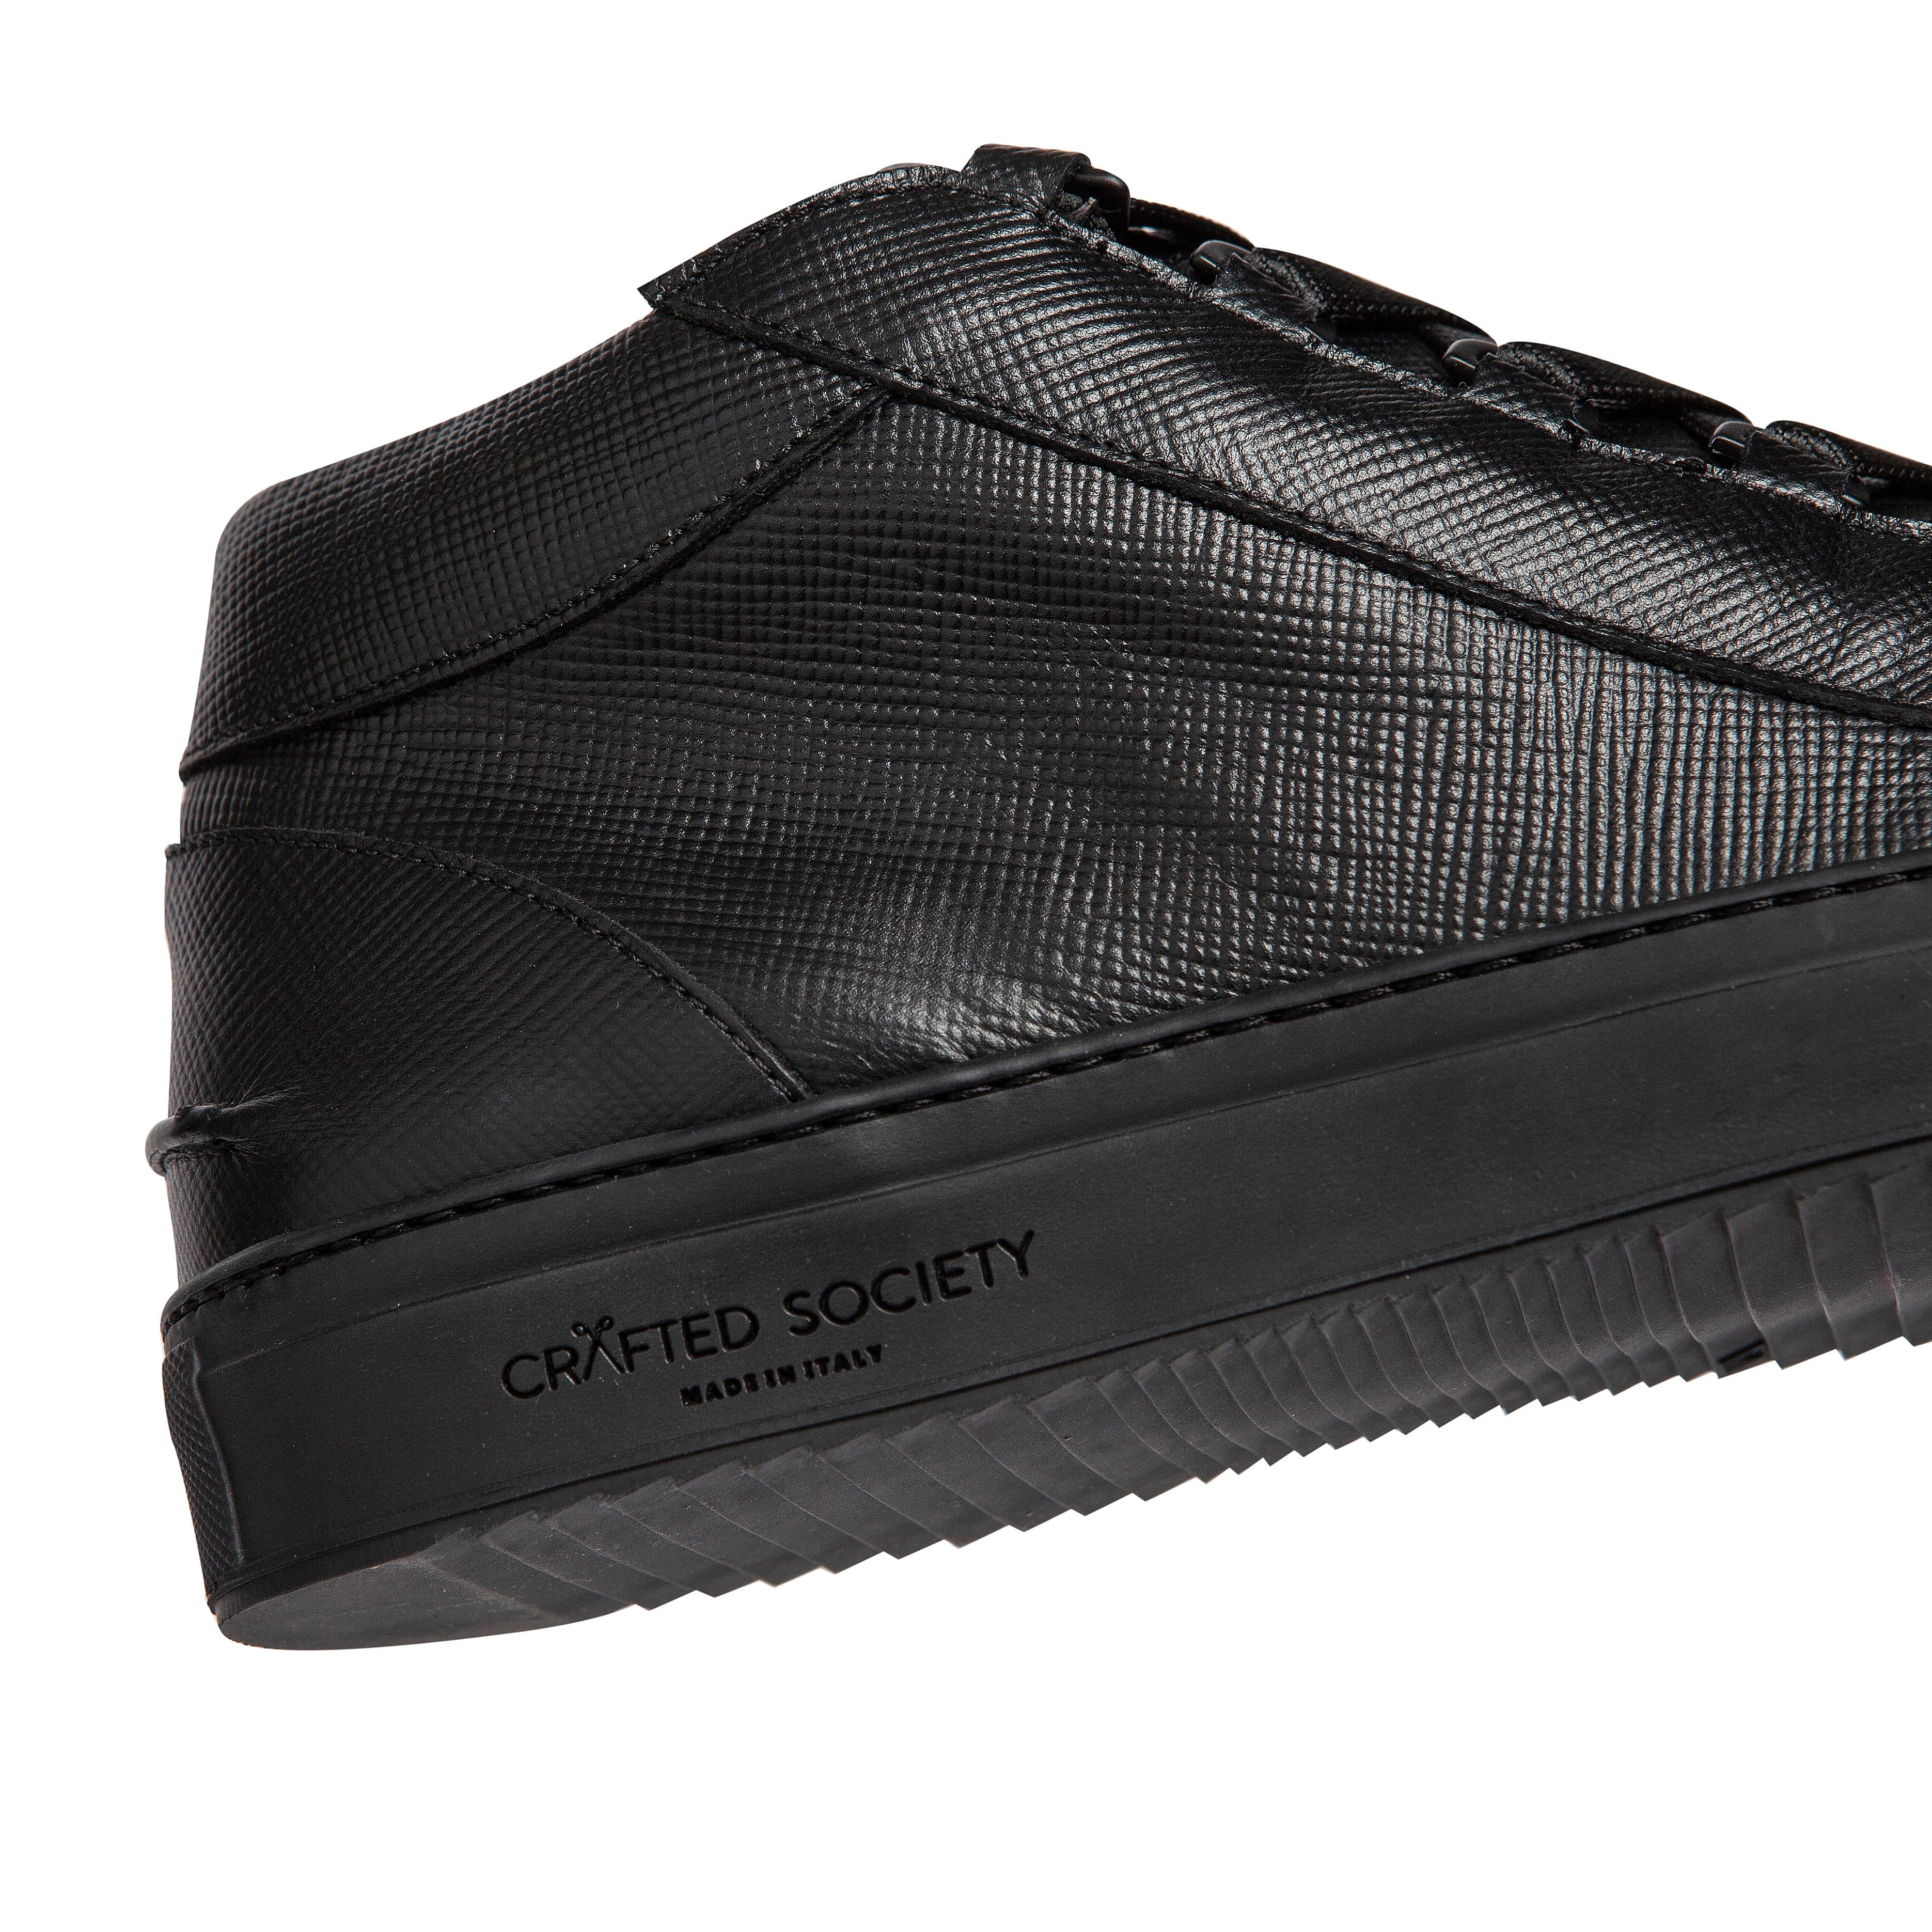 Rico Mid Sneaker Black Saffiano Leather Black Outsole Sideview